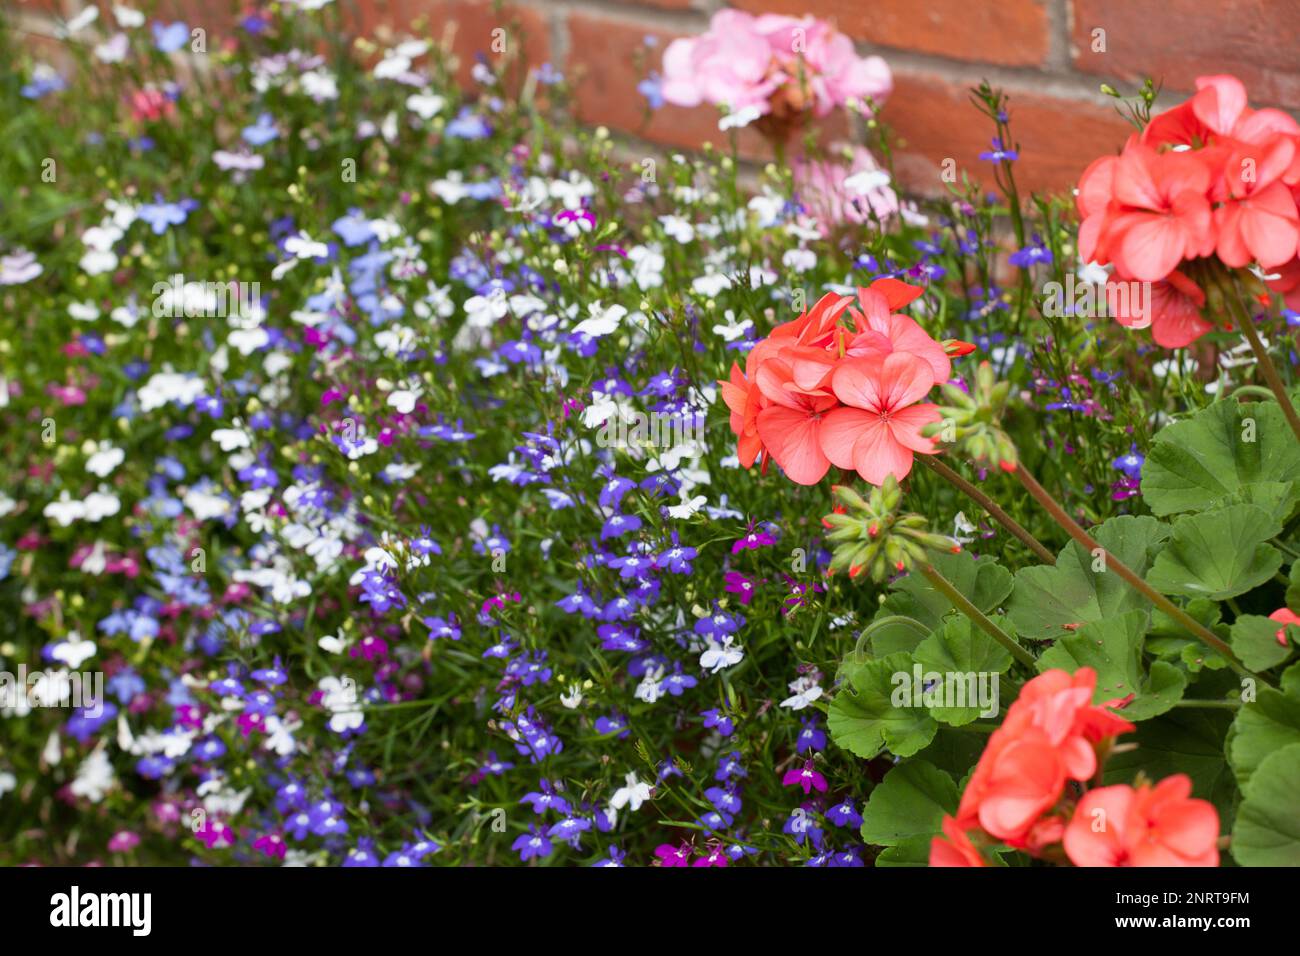 Geranium and Lobelia flowers growing near a red brick wall in an English country garden Stock Photo